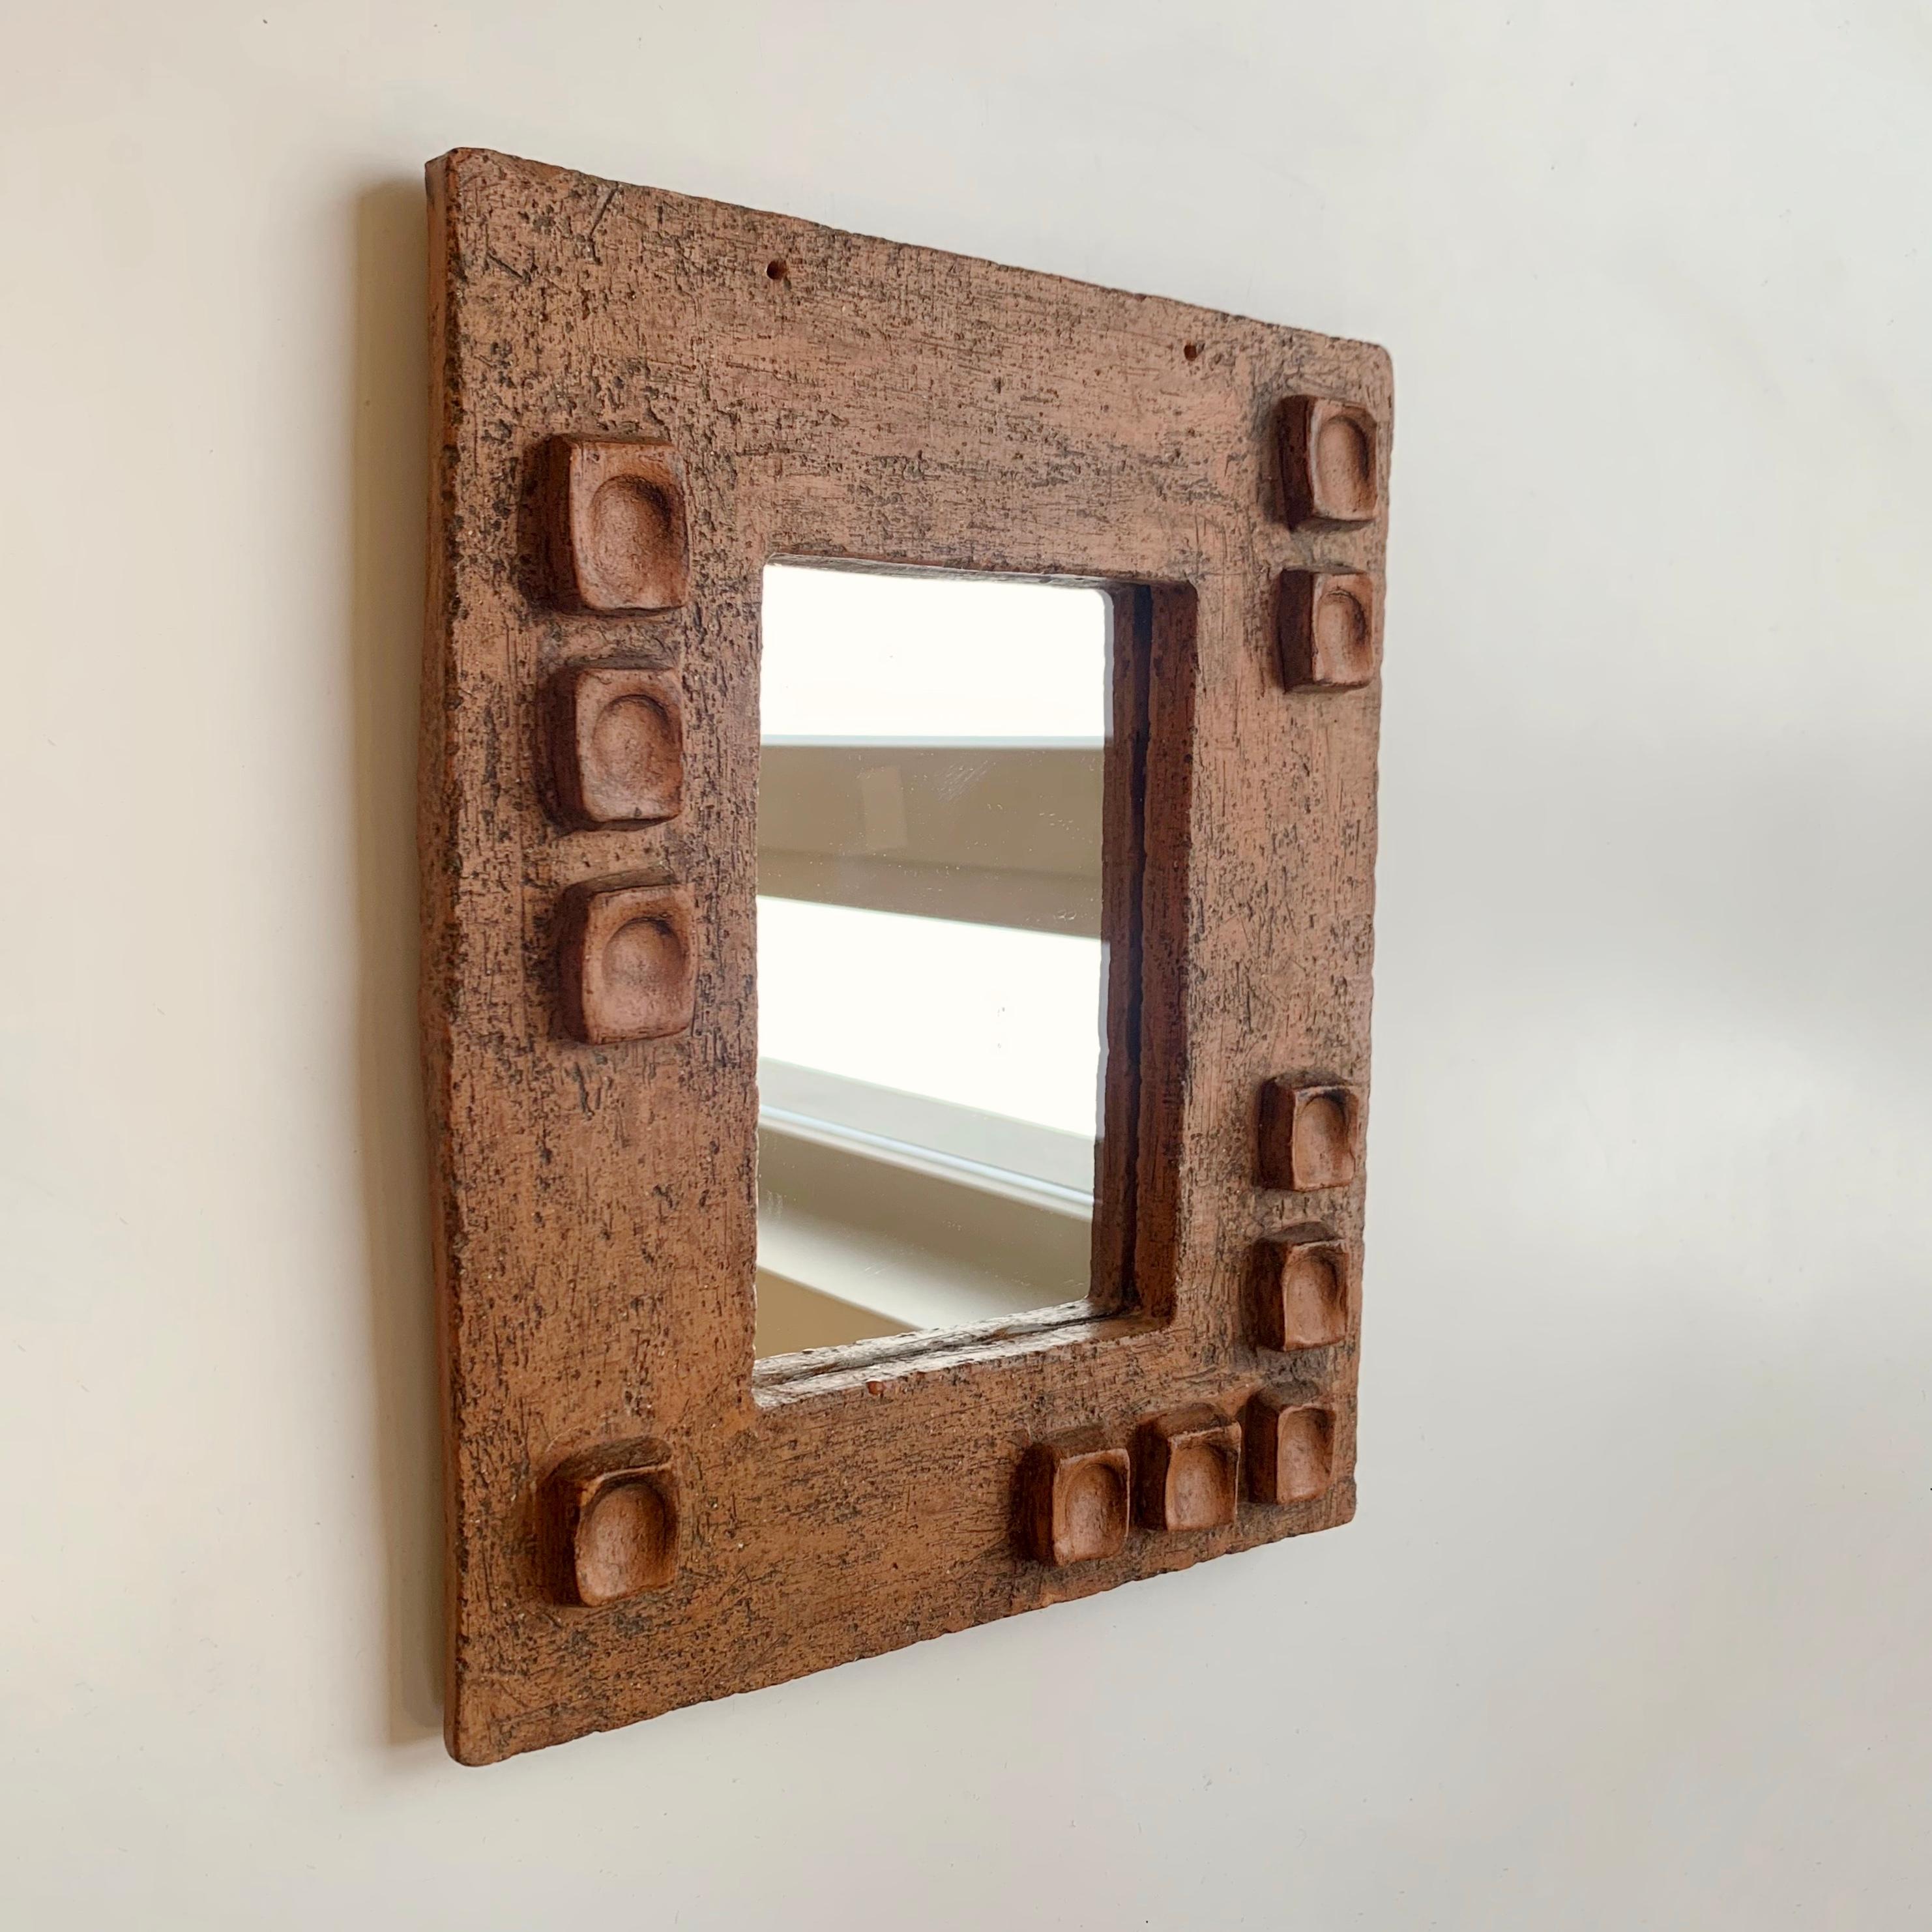 Ceramic Mirror With Abstract Composition circa 1950, France. 2